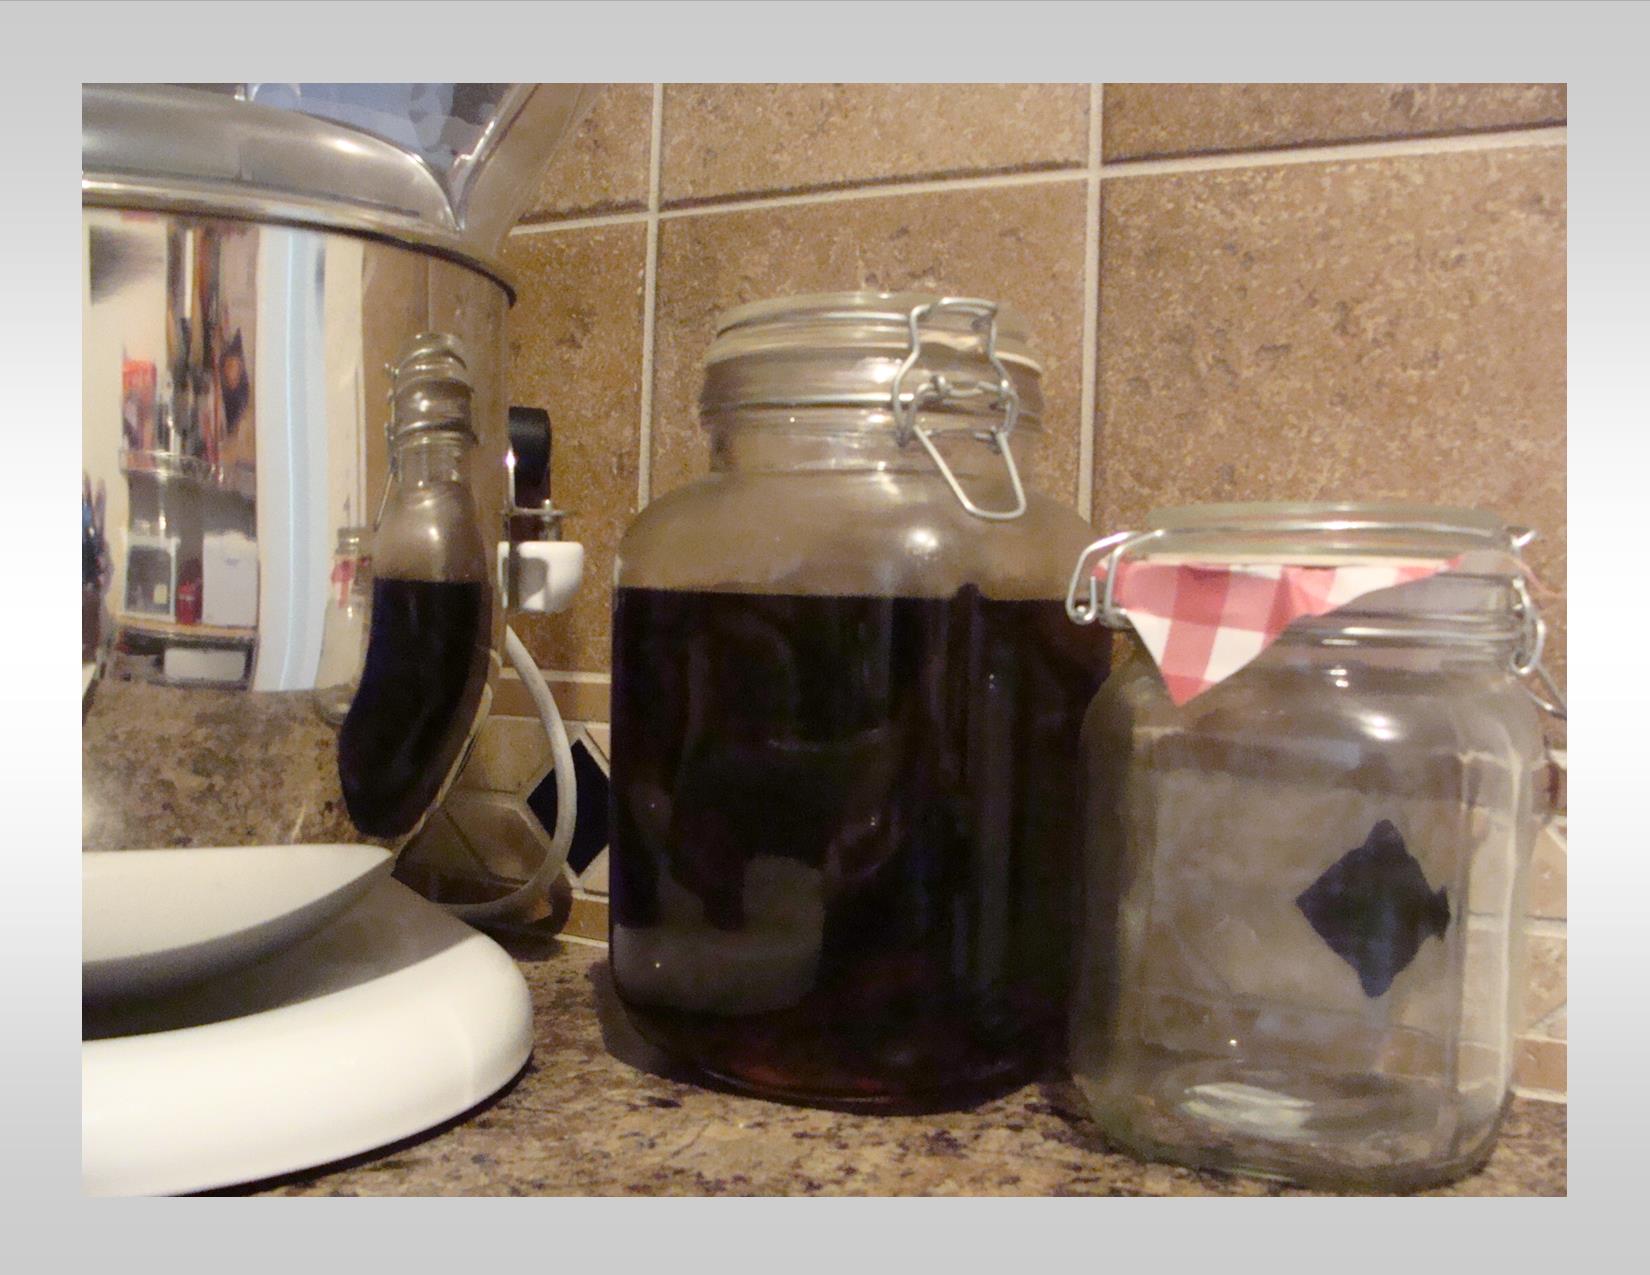 Make Your Own Vanilla Extract